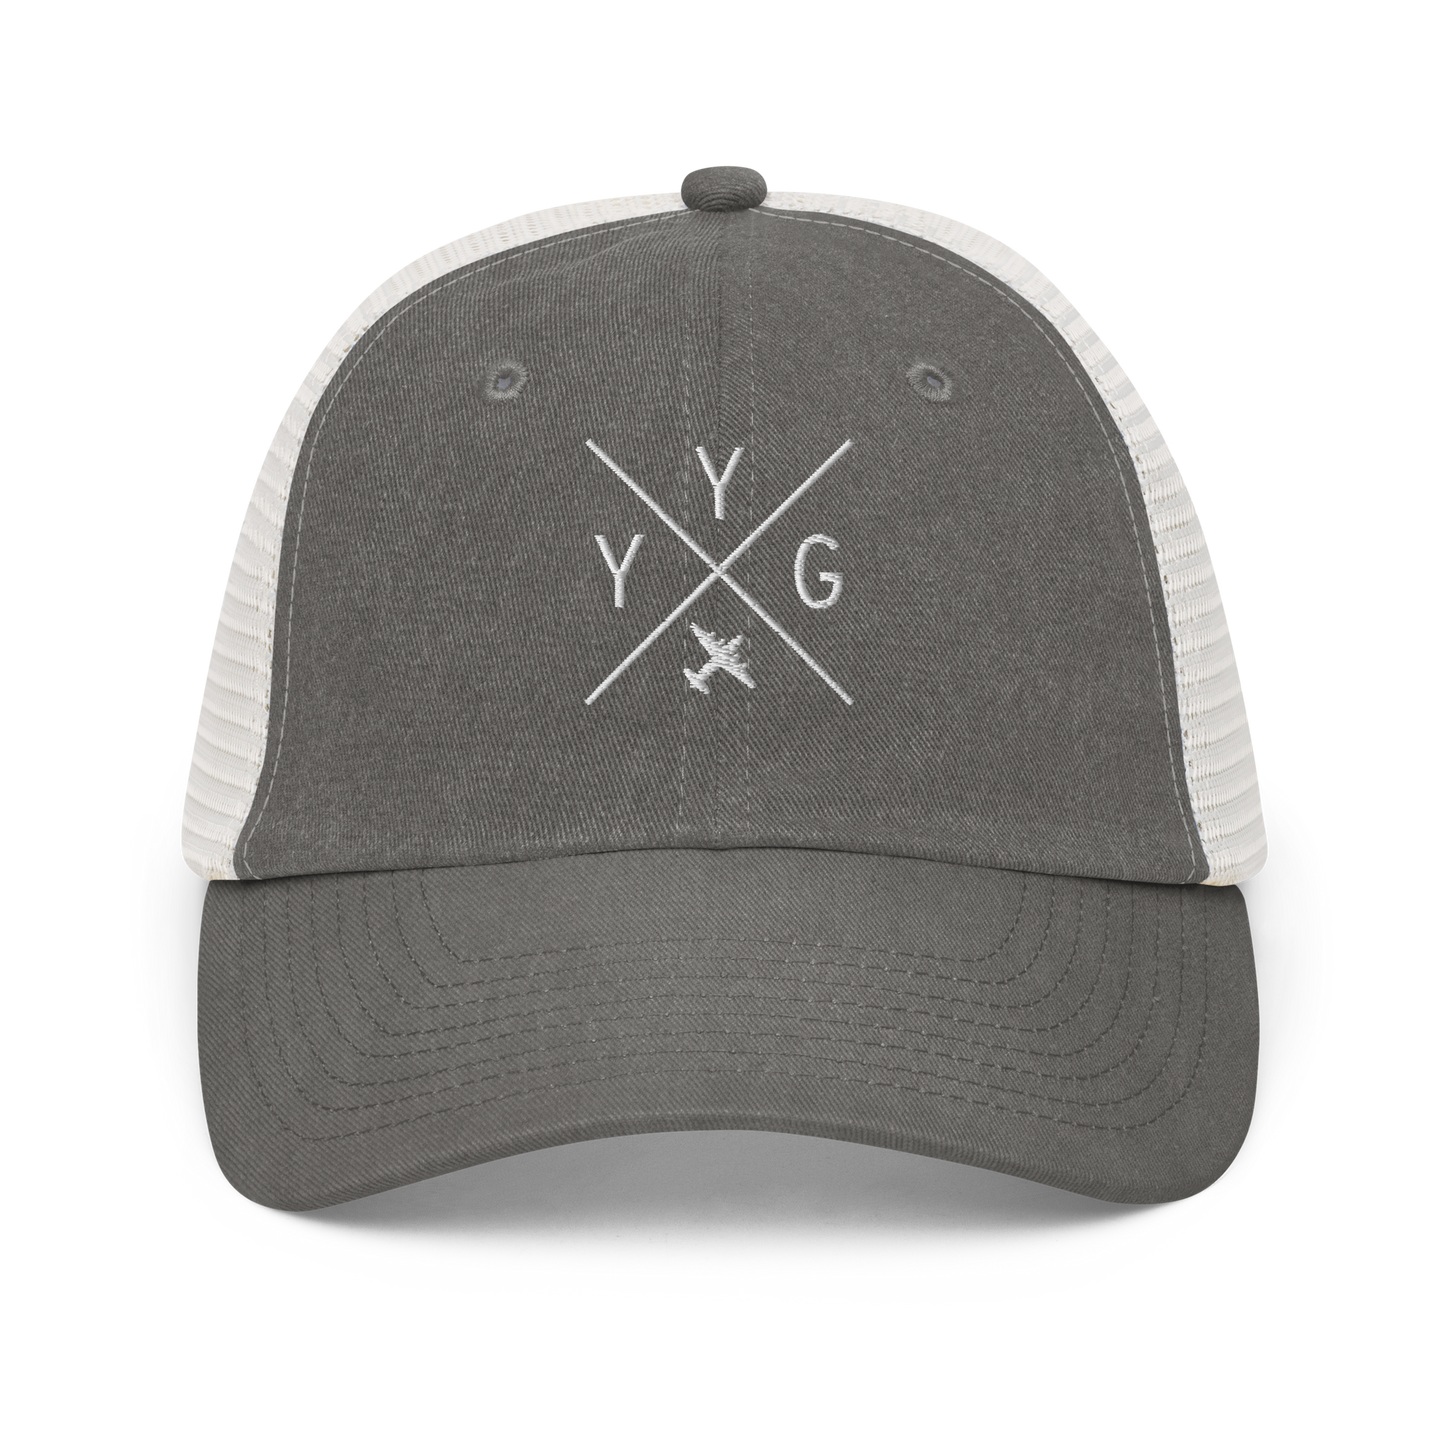 YHM Designs - YYG Charlottetown Pigment-Dyed Trucker Cap - Crossed-X Design with Airport Code and Vintage Propliner - White Embroidery - Image 09